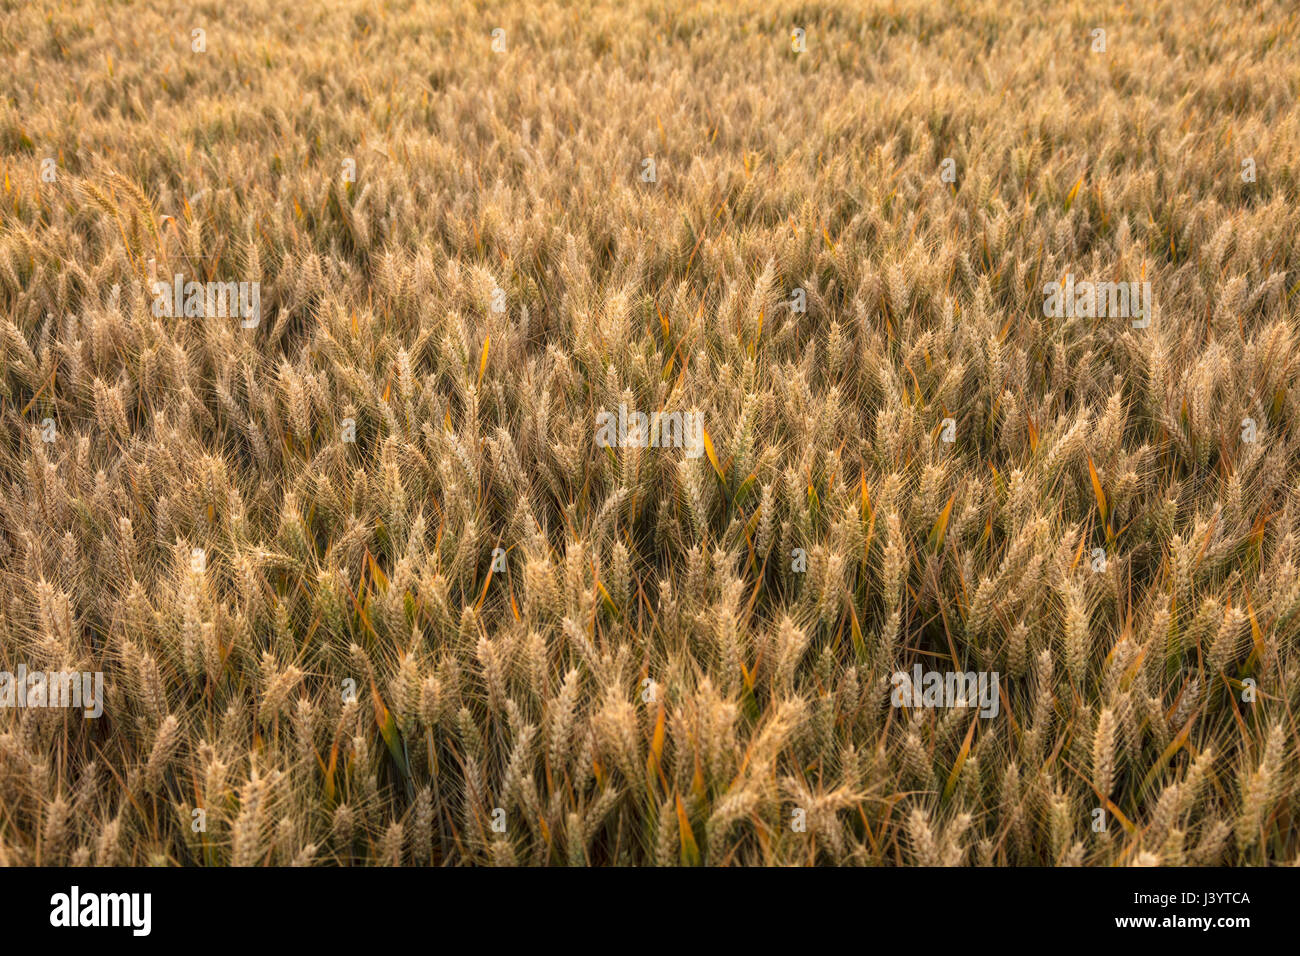 Golden field of barley crops growing on farm at sunset or sunrise Stock Photo